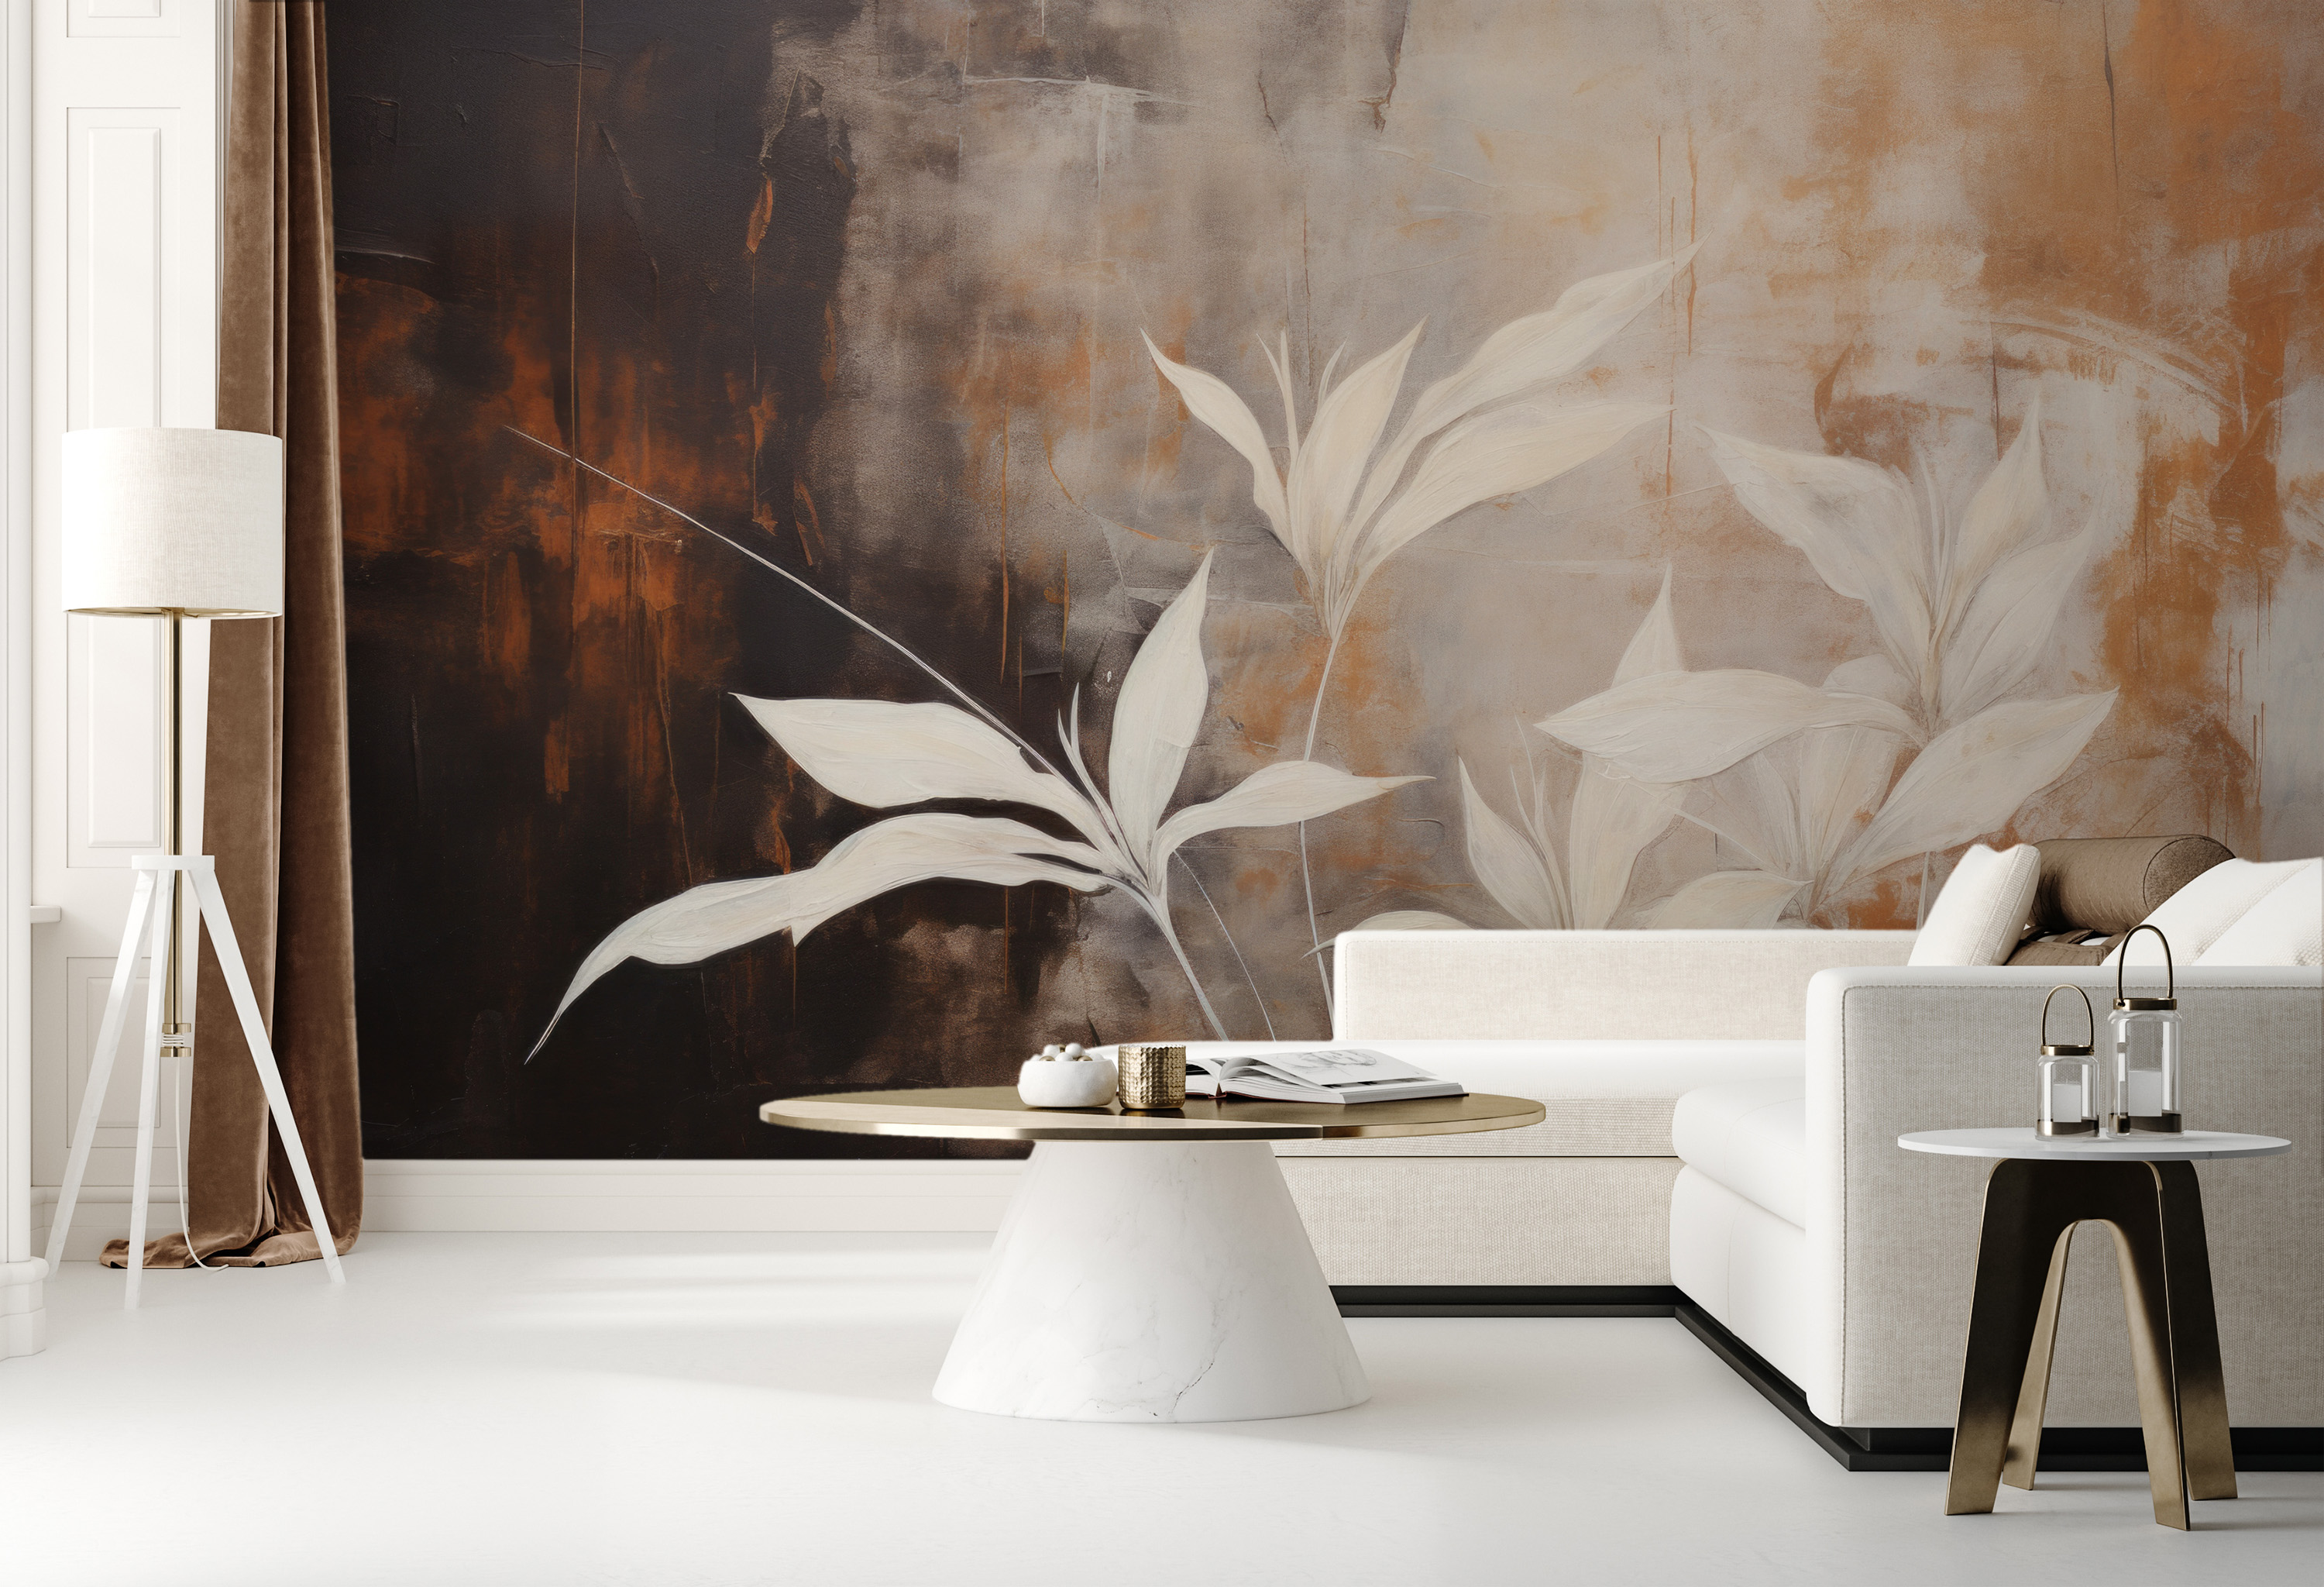 Modern Botanicals' is a photo wallpaper with a modern approach to plant motifs, where white flowers contrast with an abstract brown background.